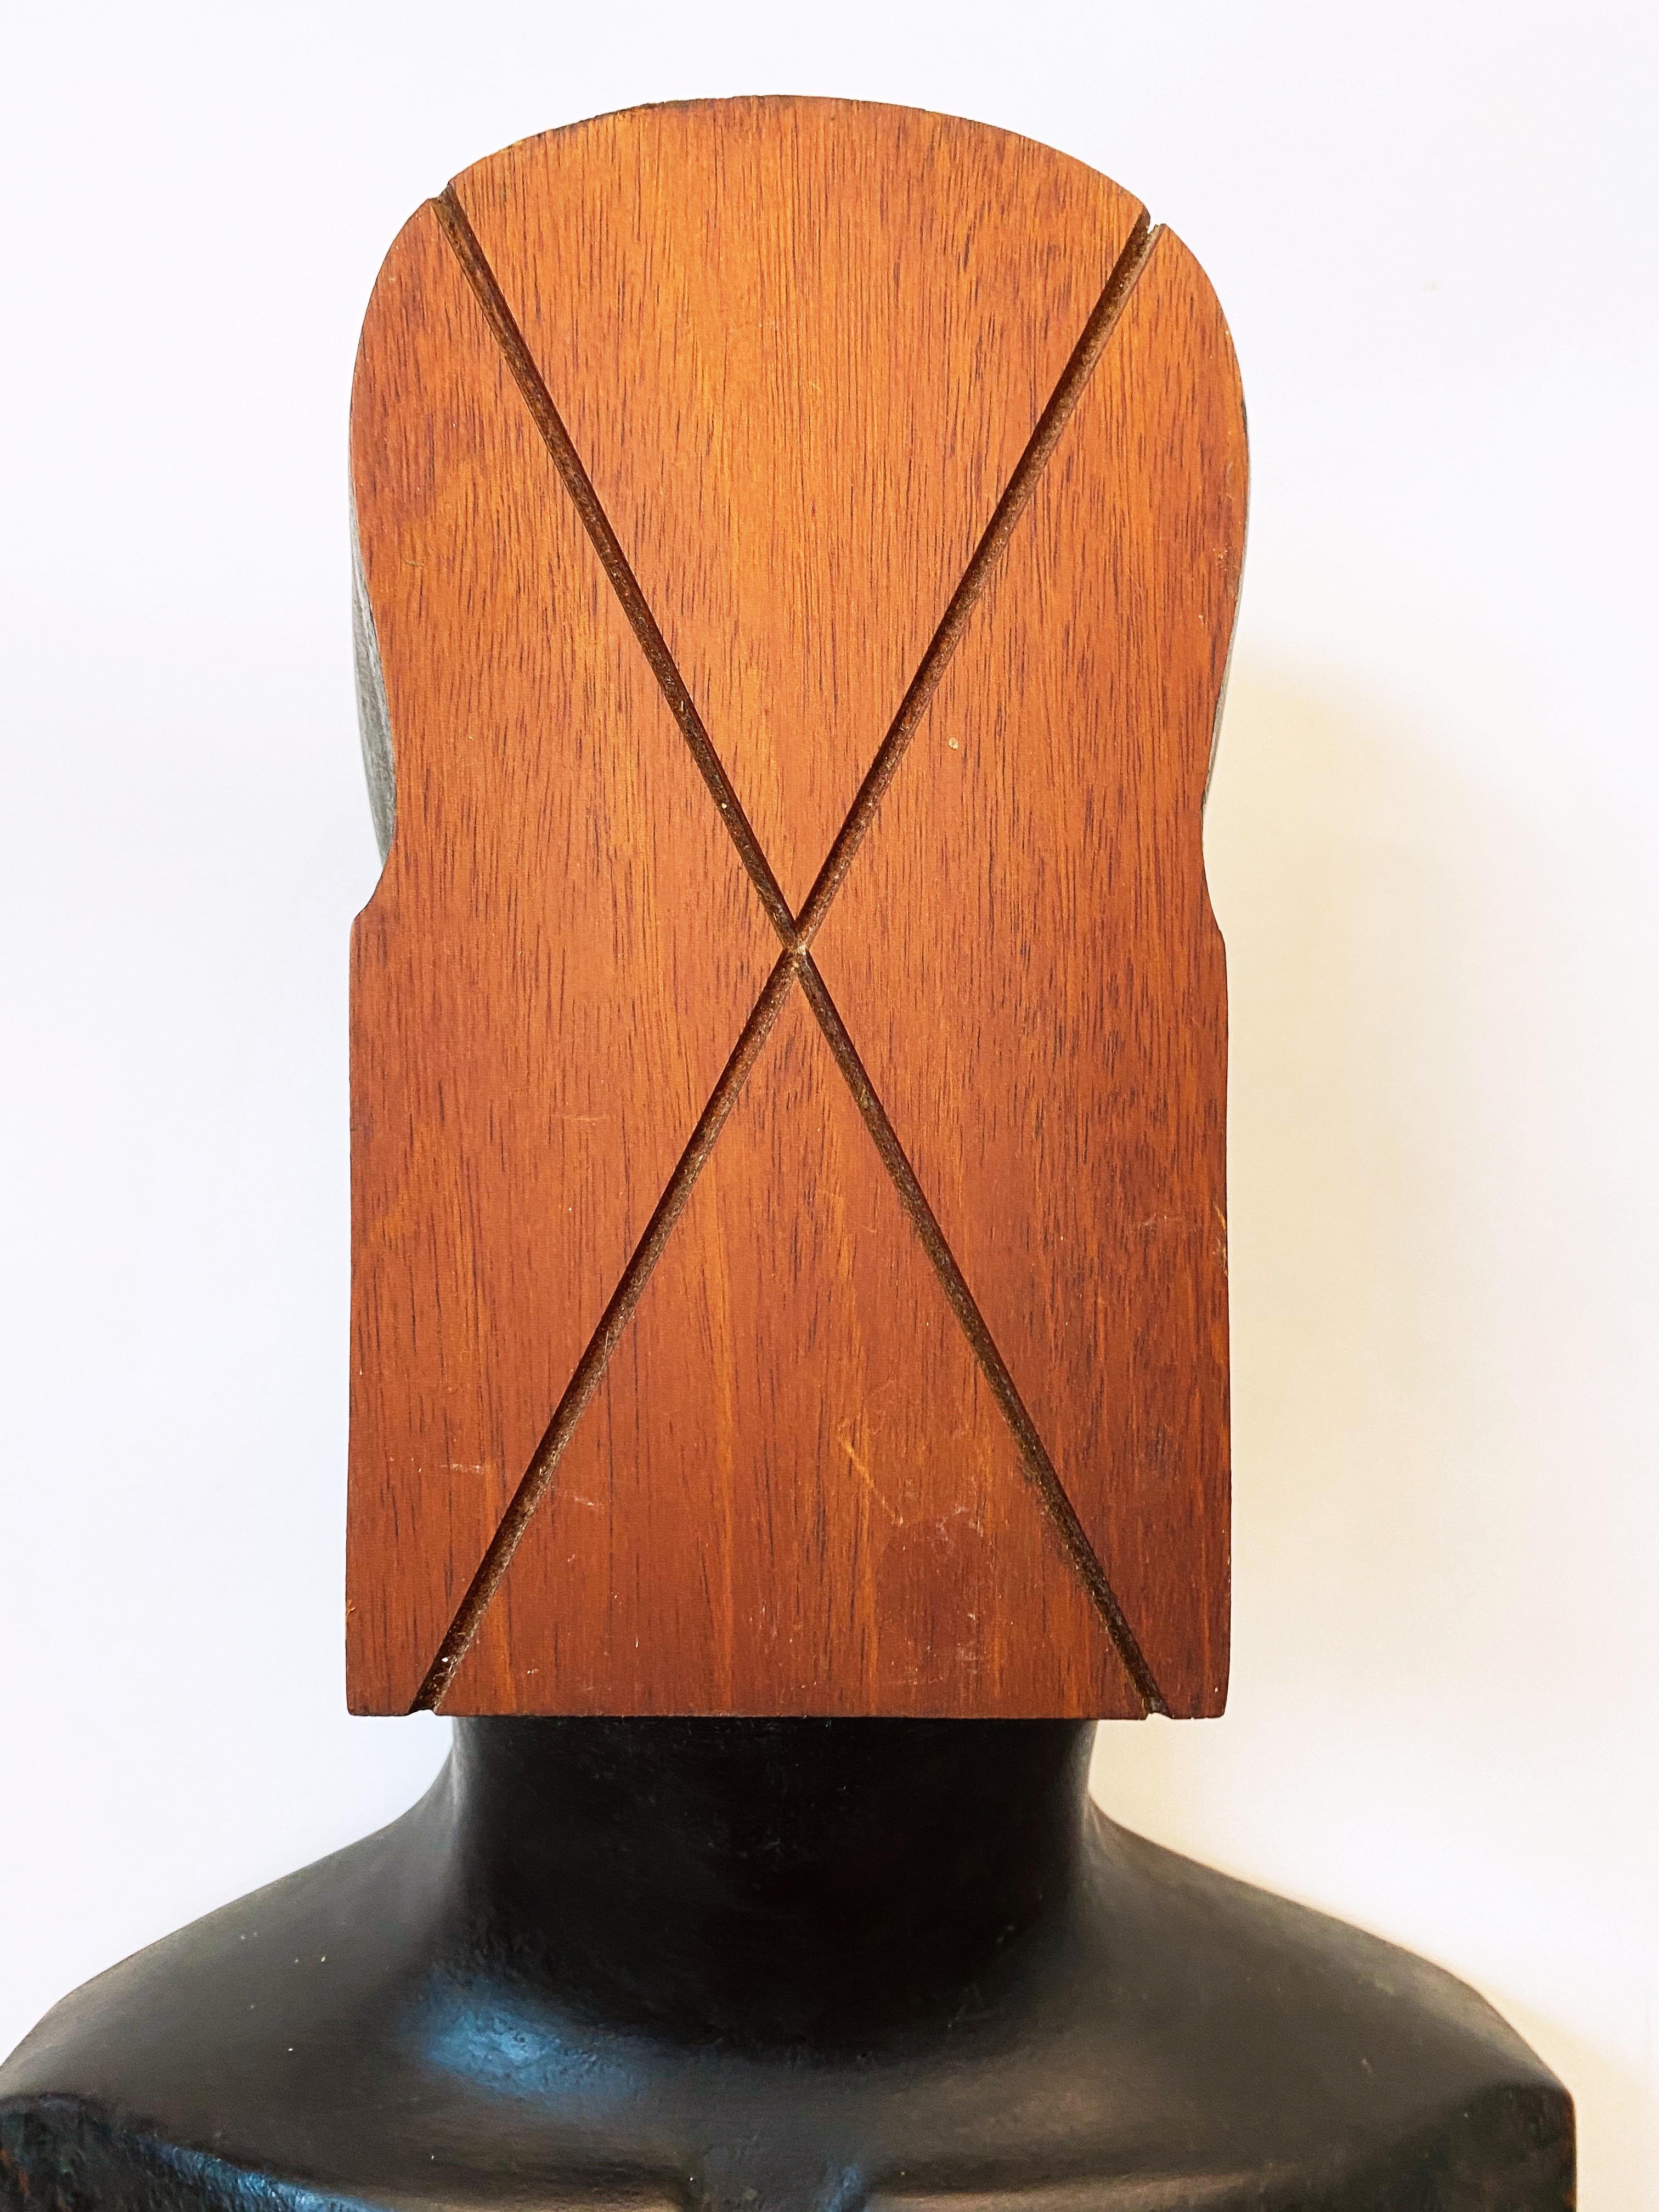 Vintage 1980s Jim Pruitt Hand Carved Mahogany Female Figurative Large Sculpture In Good Condition For Sale In San Antonio, TX